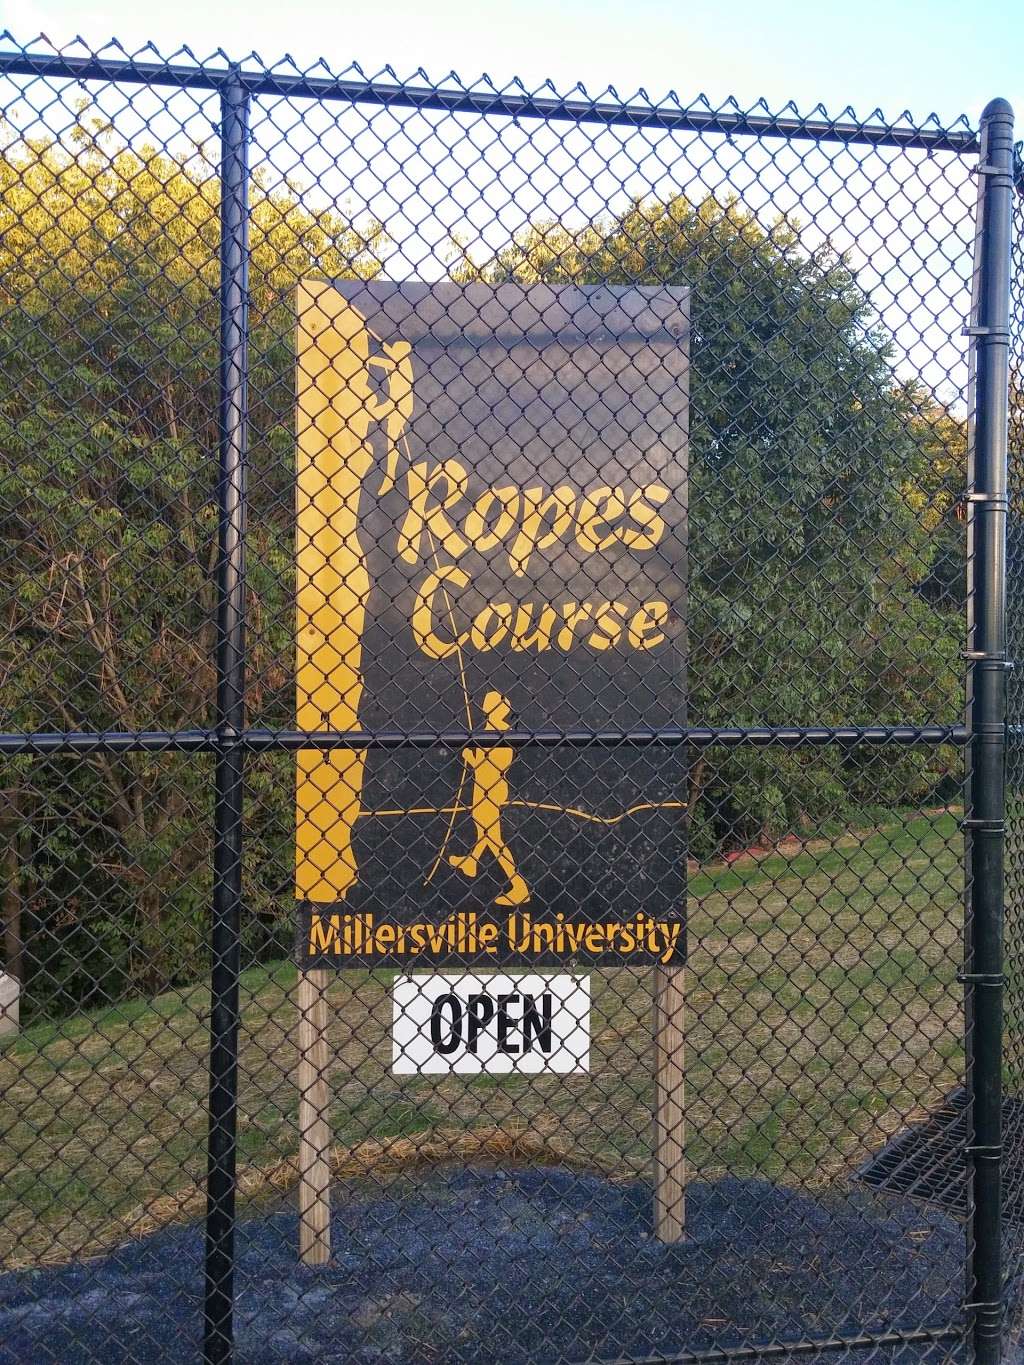 Millersville University Ropes Course | 125 Pucillo Dr, Millersville, PA 17551, USA